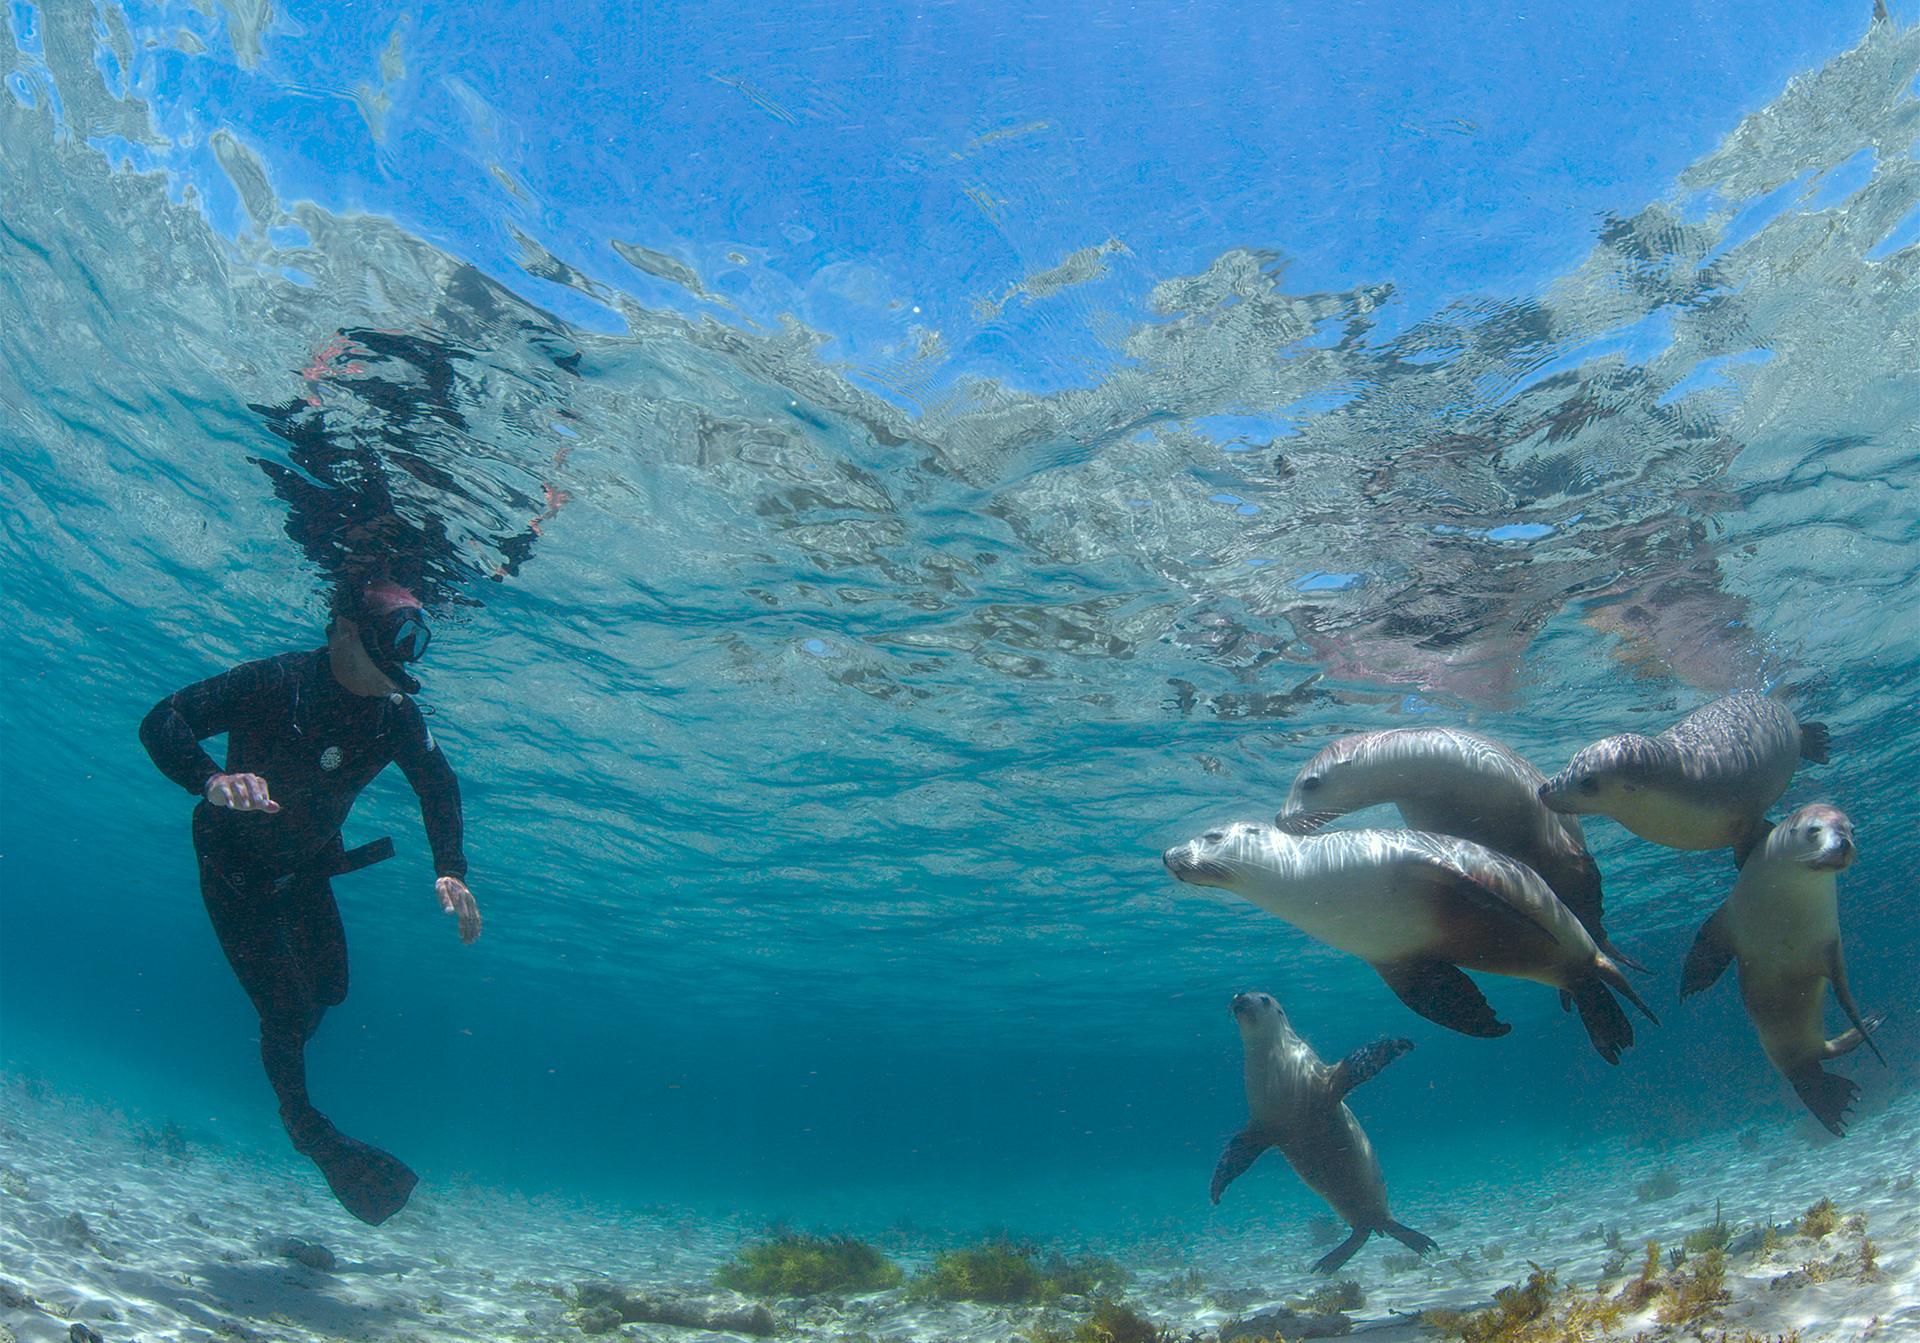 The Hong Kong Space Museum launched a new Omnimax show, "Sea Lions: Life by a Whisker", today (April 21). Picture shows a marine park ranger interacting with Australian sea lions.